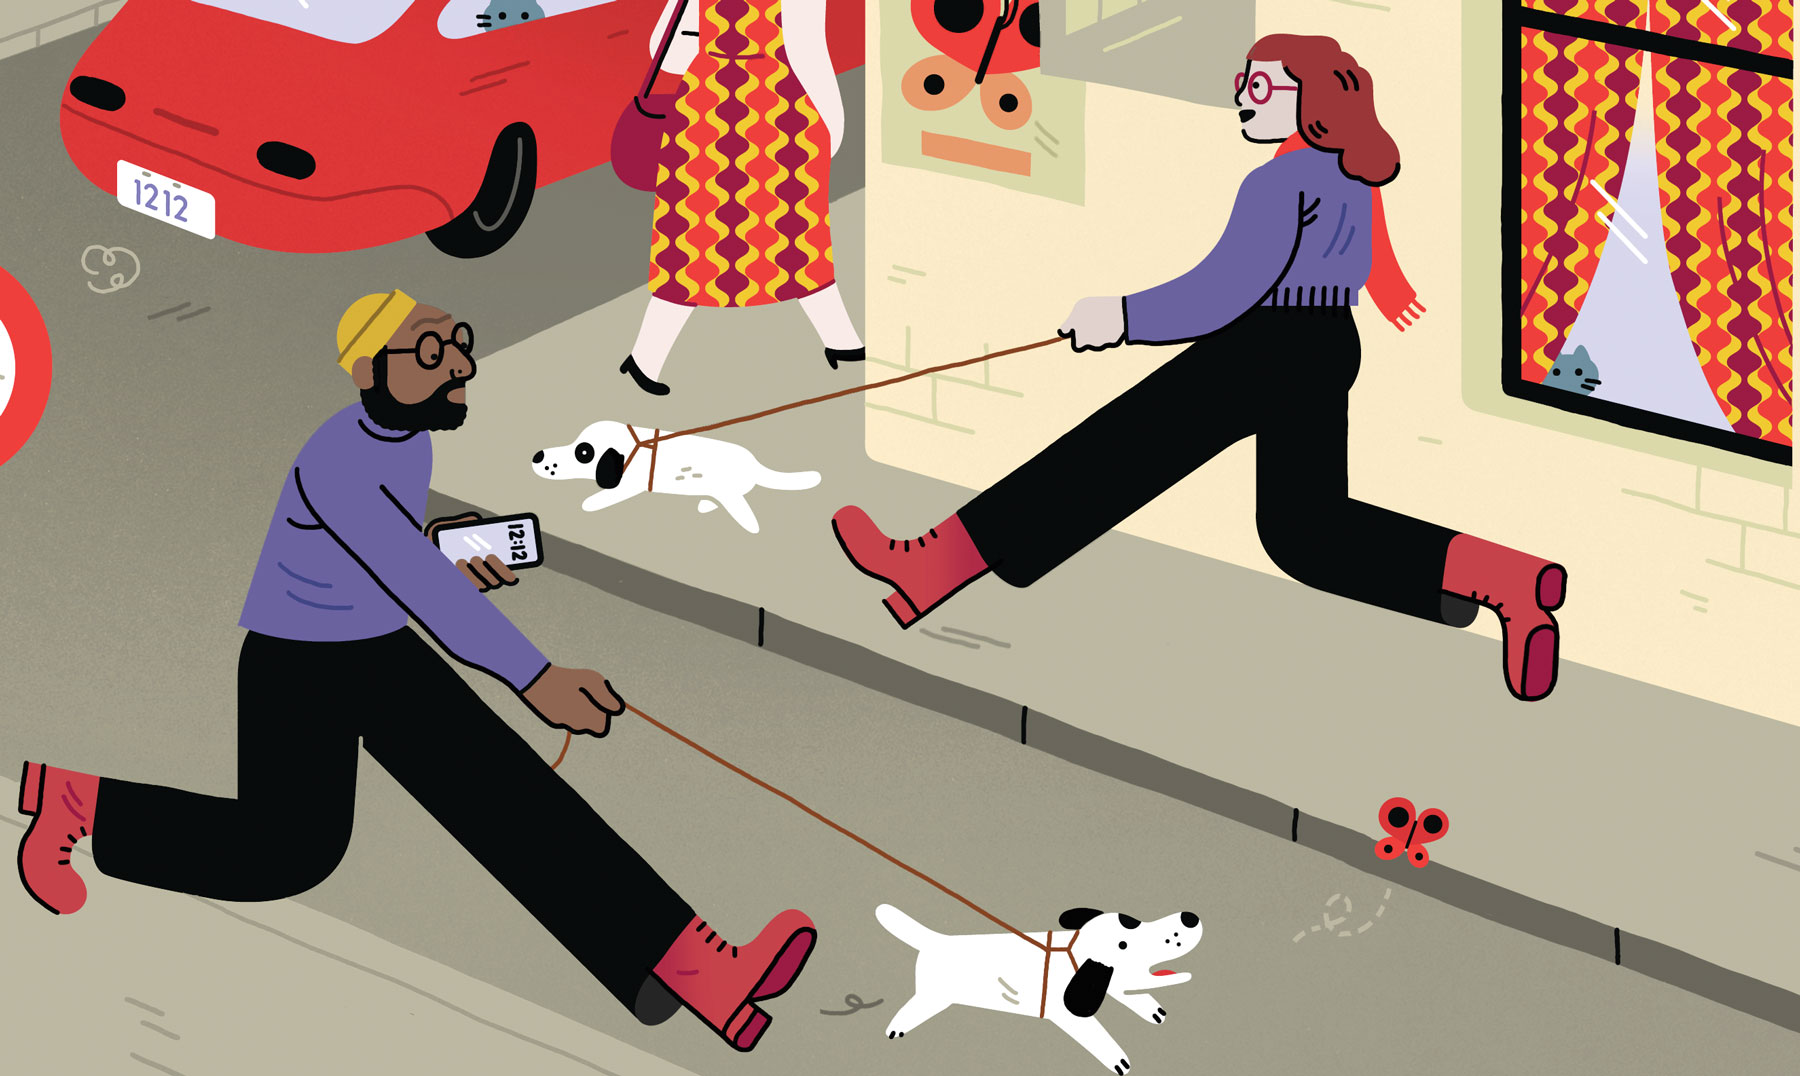 An illustration of man and woman walking their dogs on a busy street. They are wearing similar clothes with organ and red colors.